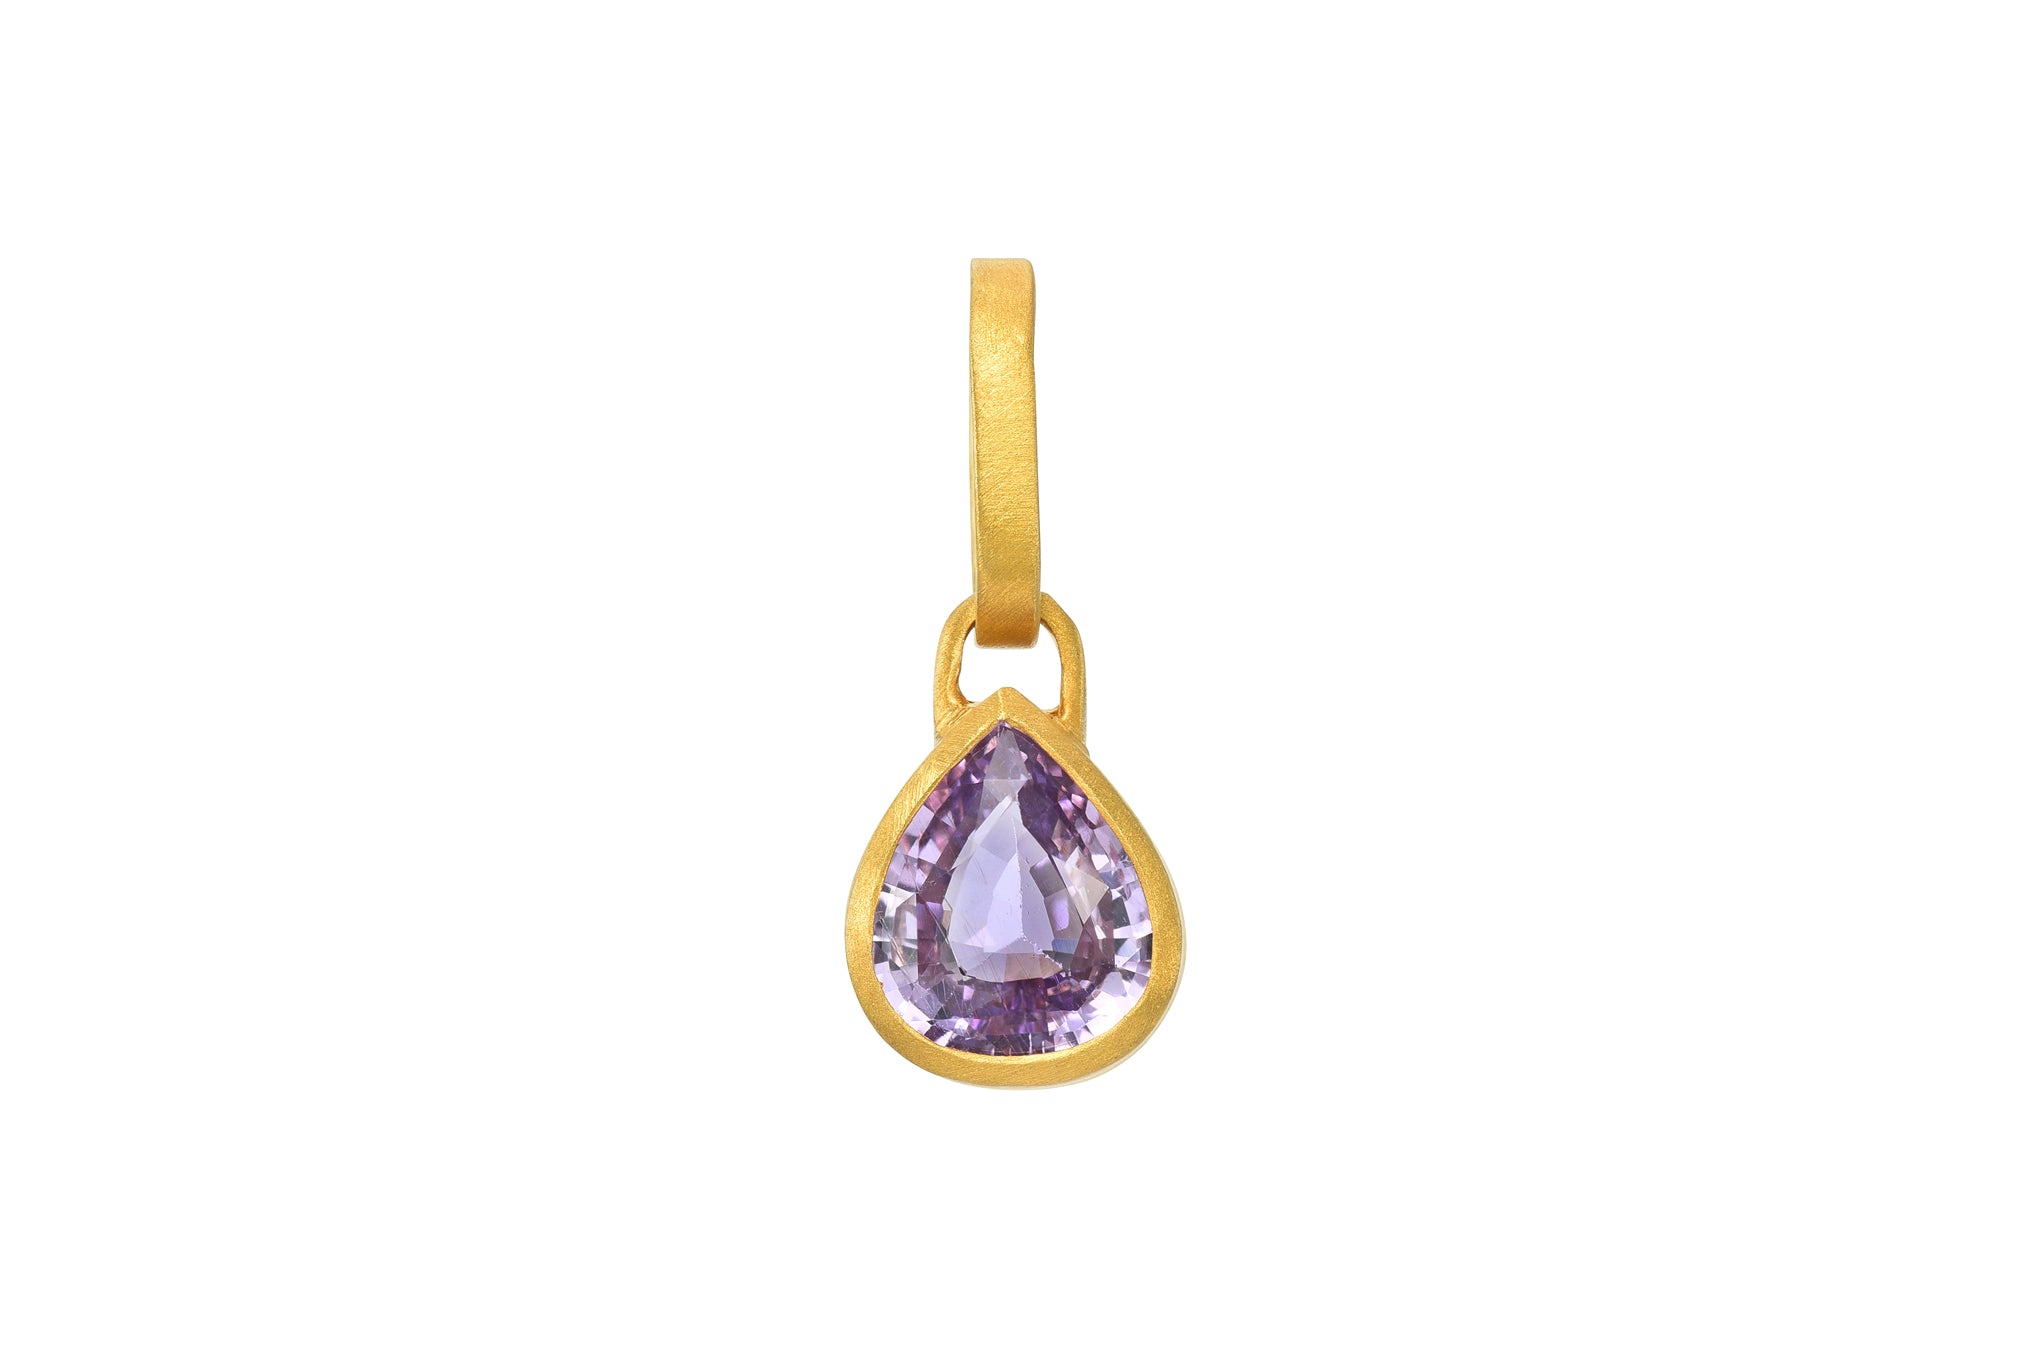 ONE OF A KIND LILAC SAPPHIRE PENDANT